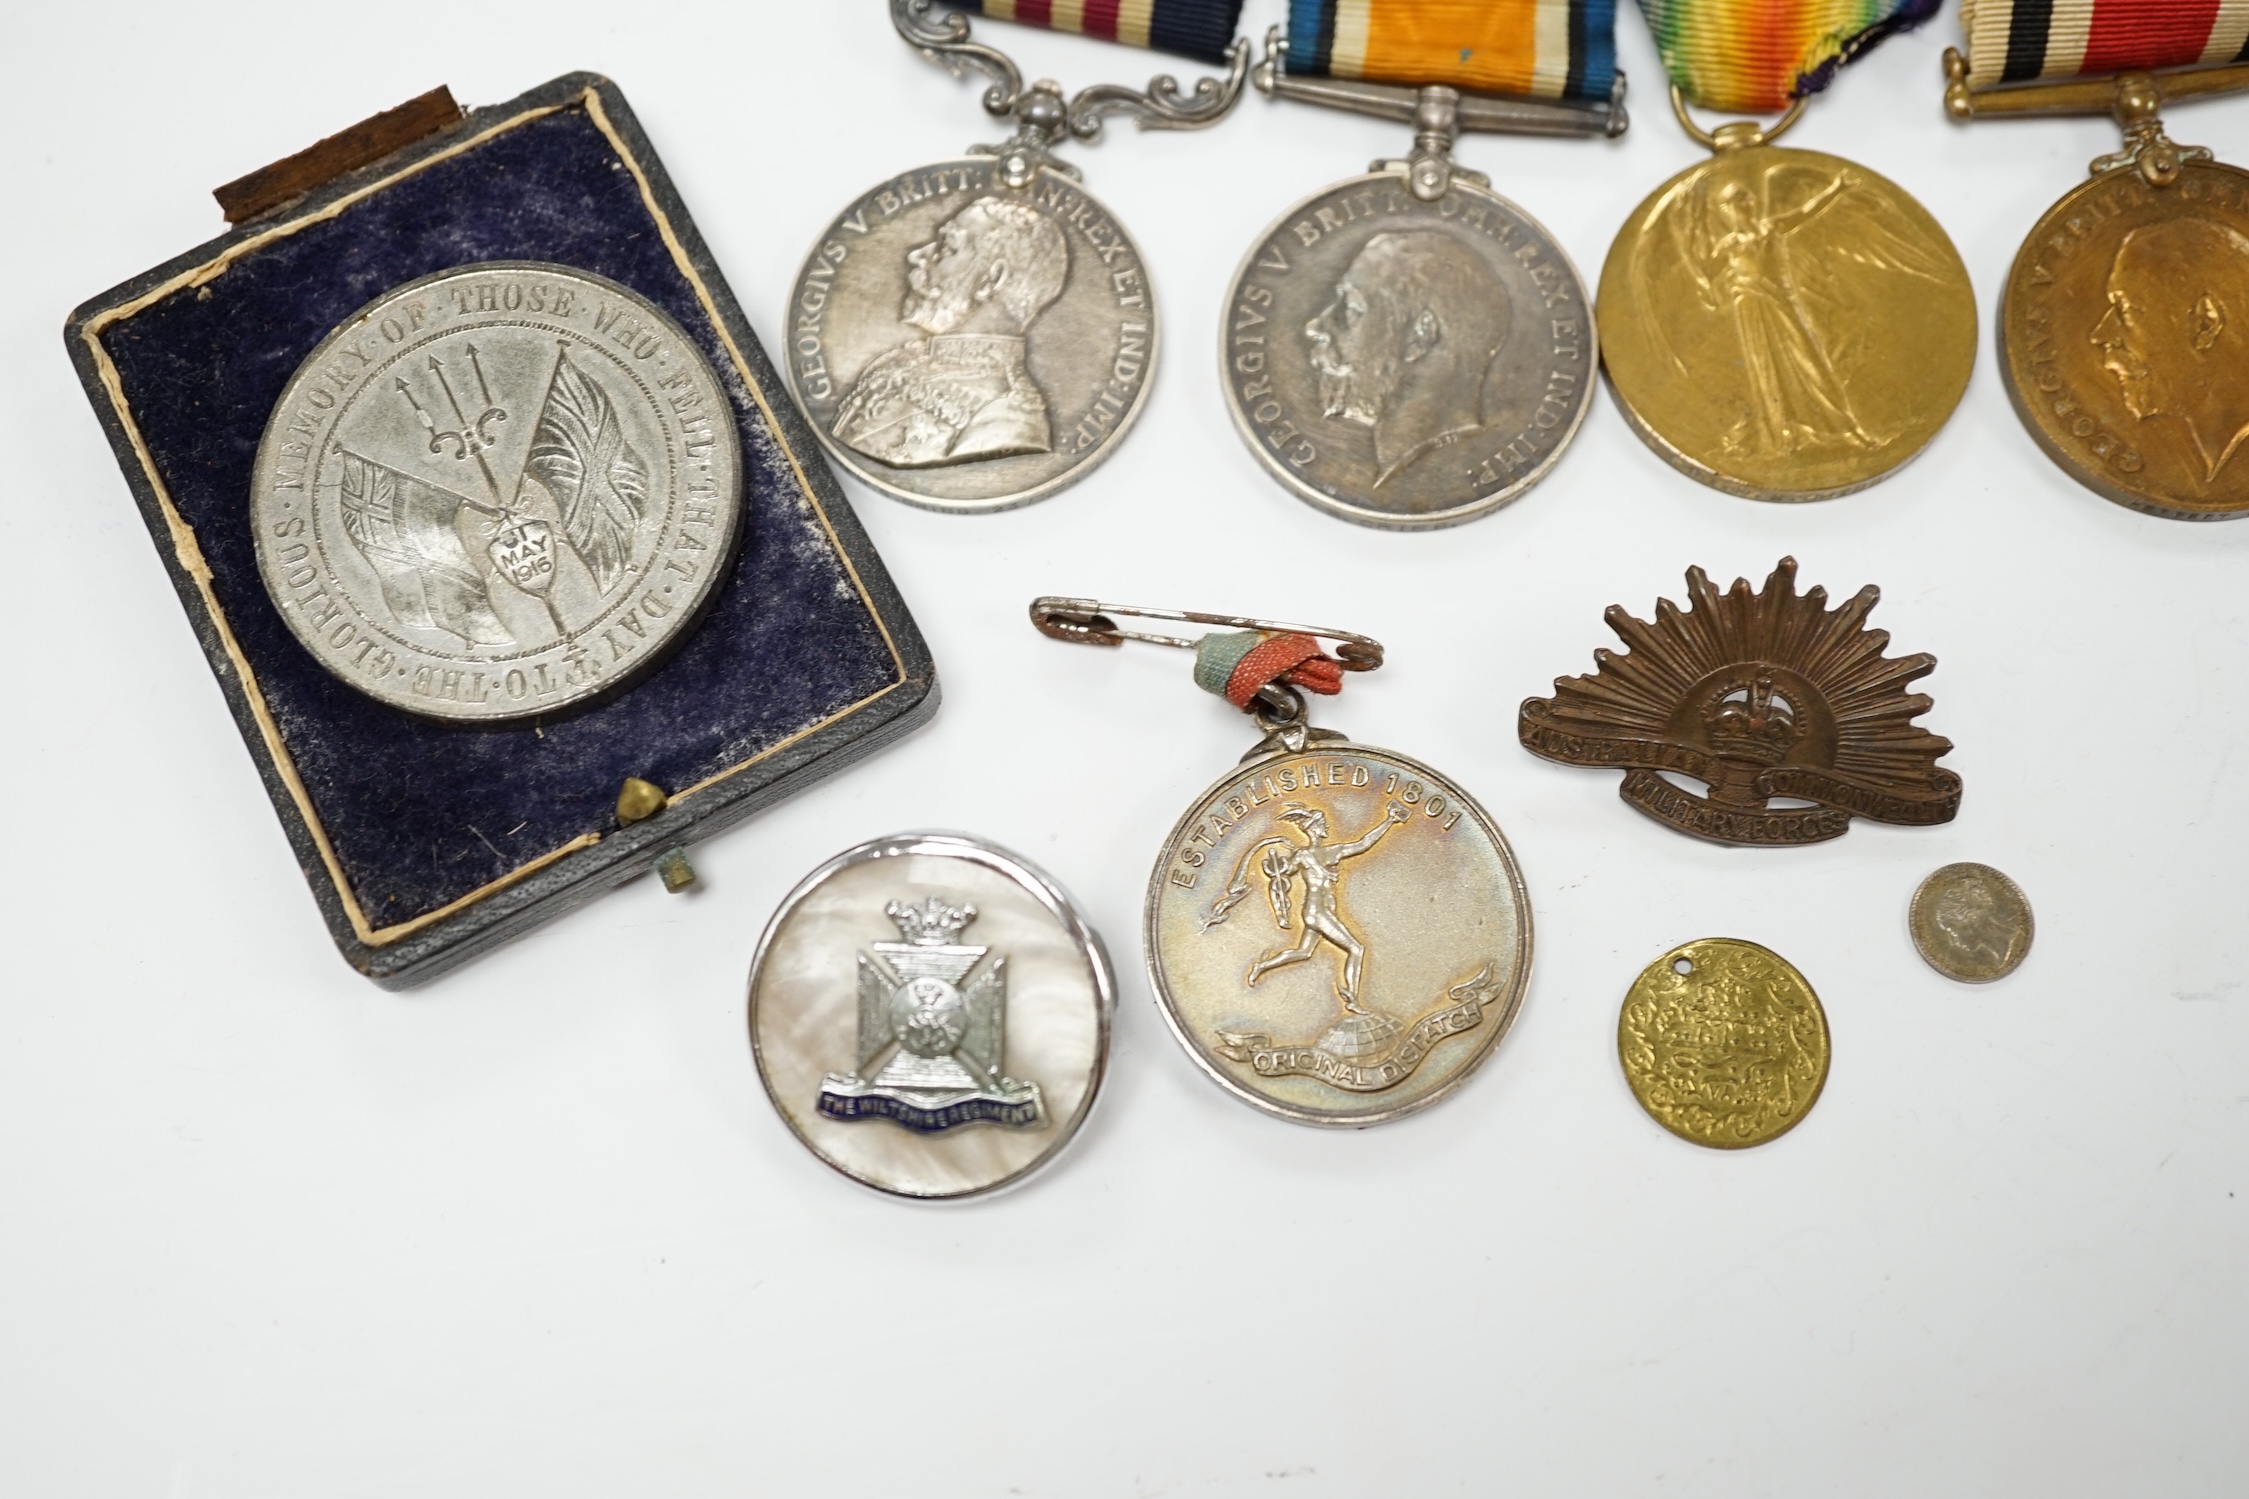 Two First World War medal groups; a military medal group awarded to Pte. H.S. Cribb, 23rd Northumberland Fusiliers, comprising; the Military Medal for Bravery in the Field, the Special Constabulary Medal, the War Medal a